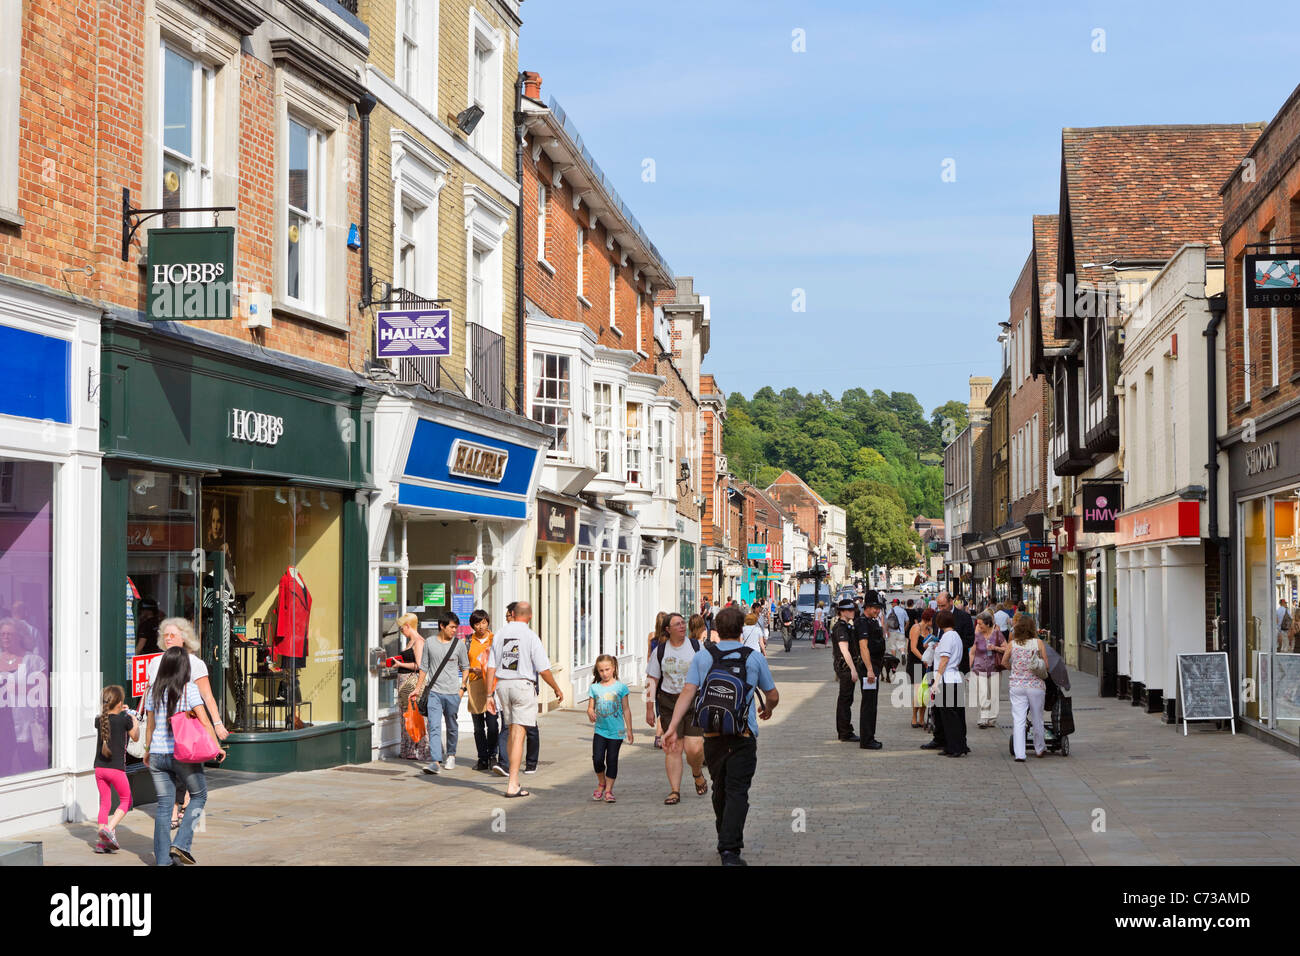 Shops on the High Street in the city centre, Winchester, Hampshire, England, UK Stock Photo